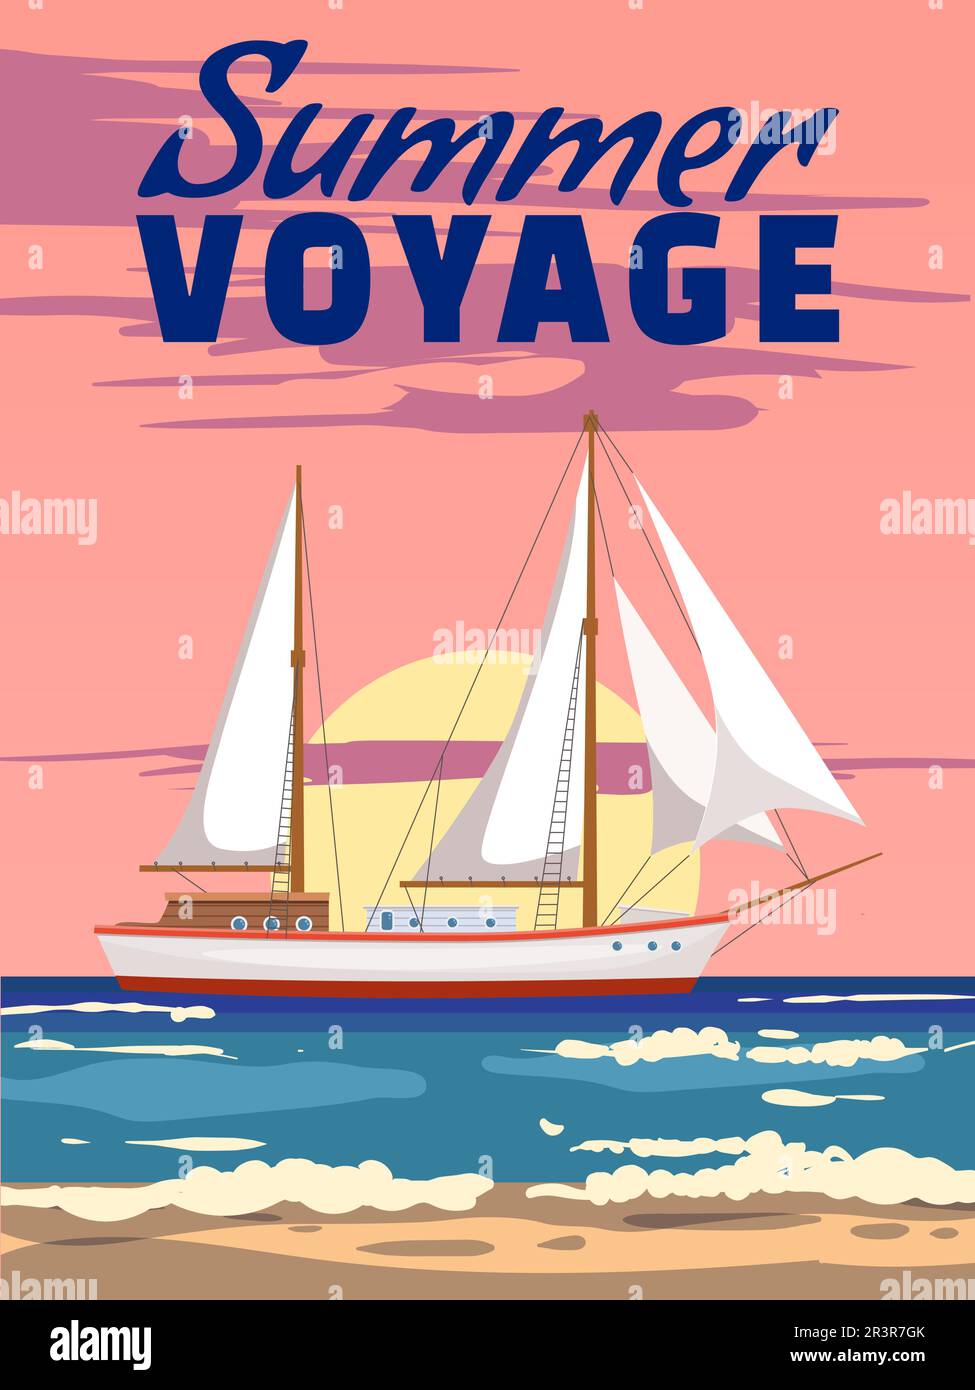 Vintage yacht man Stock Vector Images - Alamy